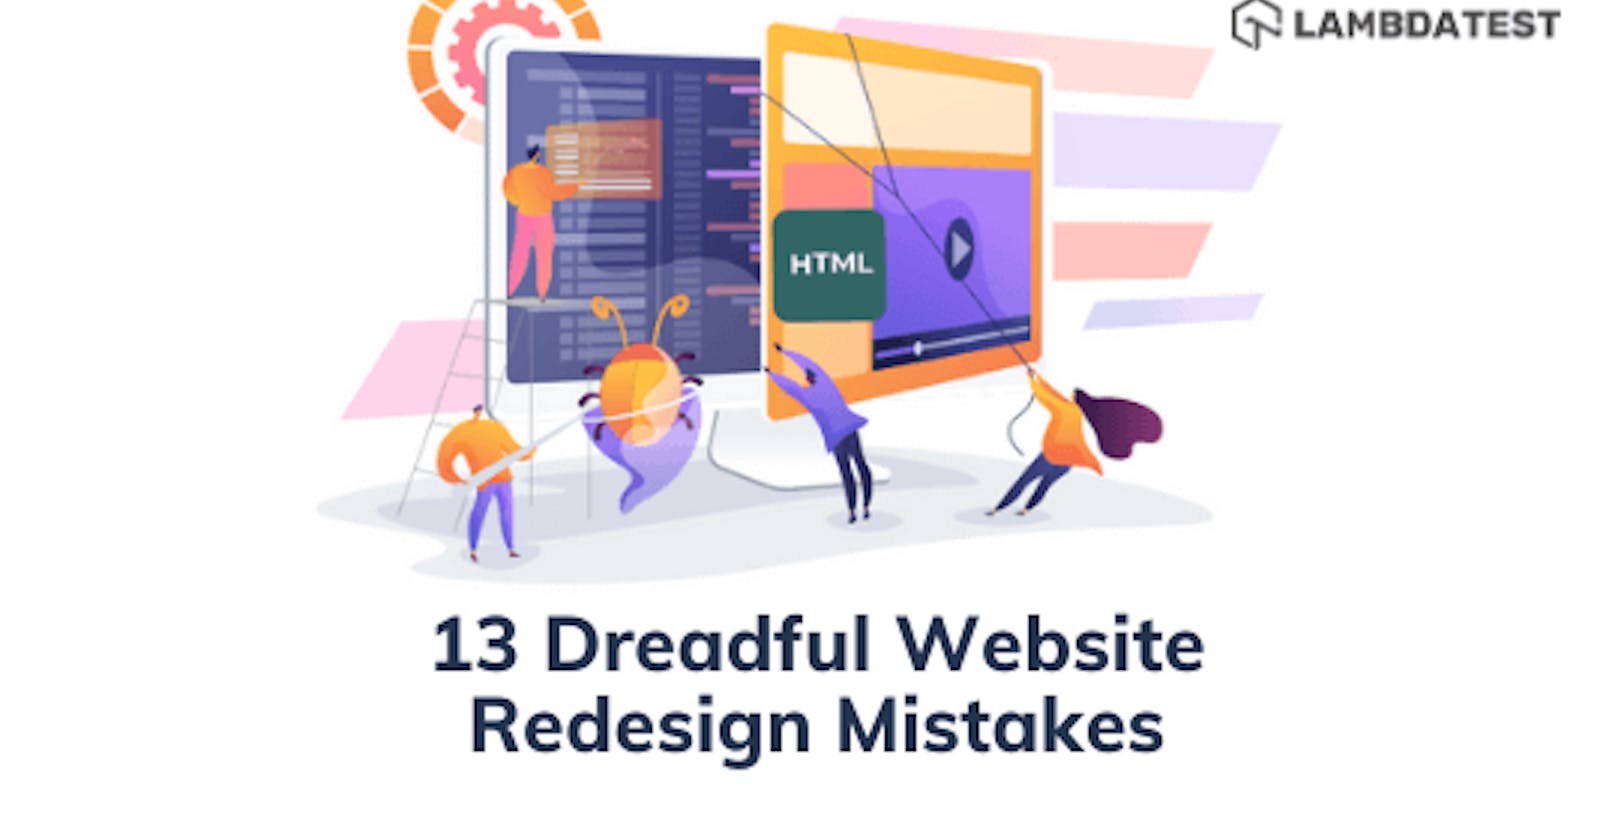 13 Dreadful Website Redesign Mistakes To Avoid In 2021